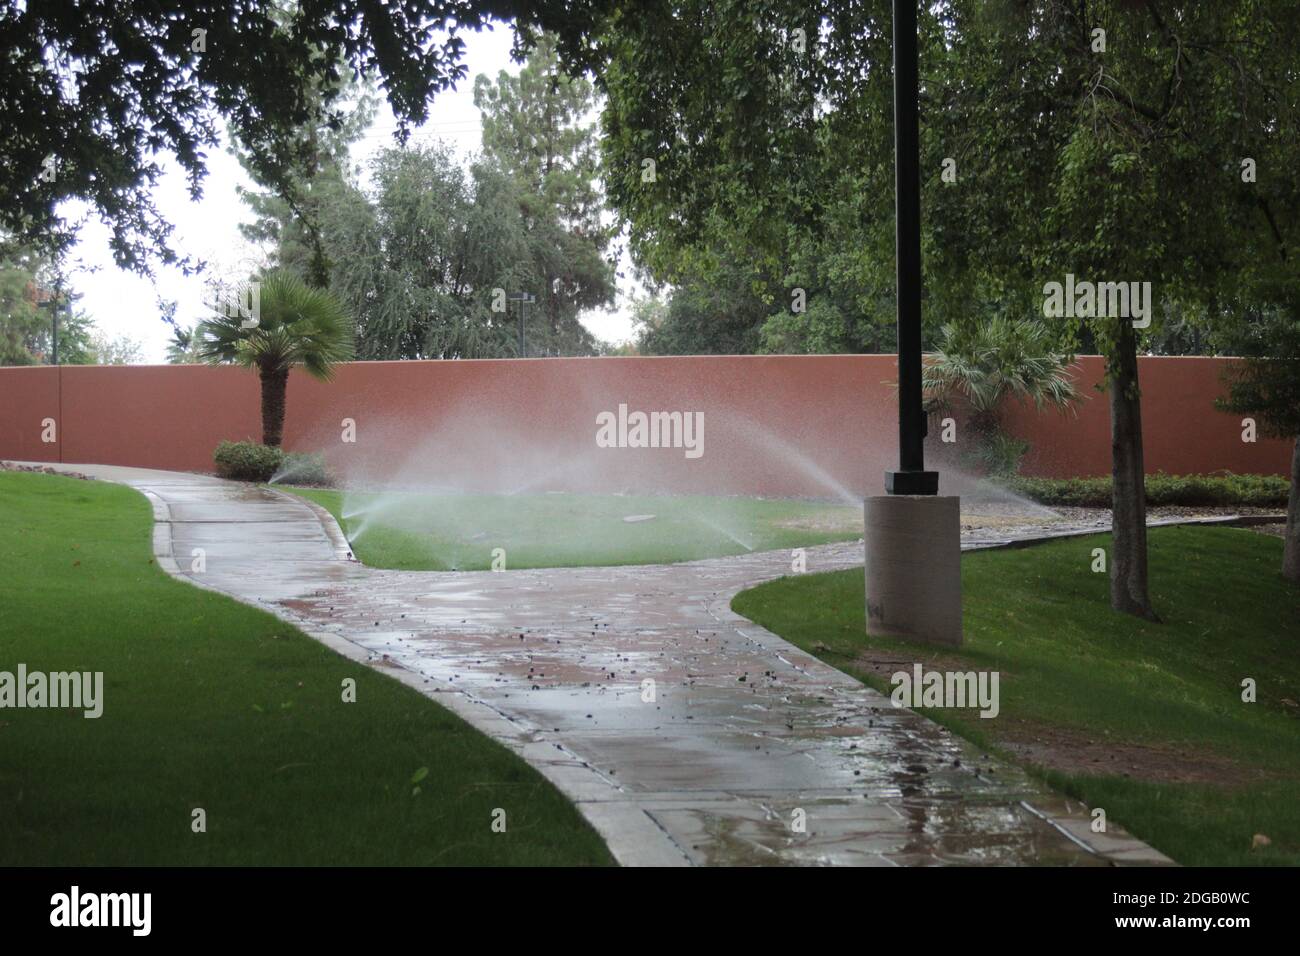 Lawn sprinkler watering grass patch between branching paths before a red wall. Business park with extensive tree cover. Stock Photo